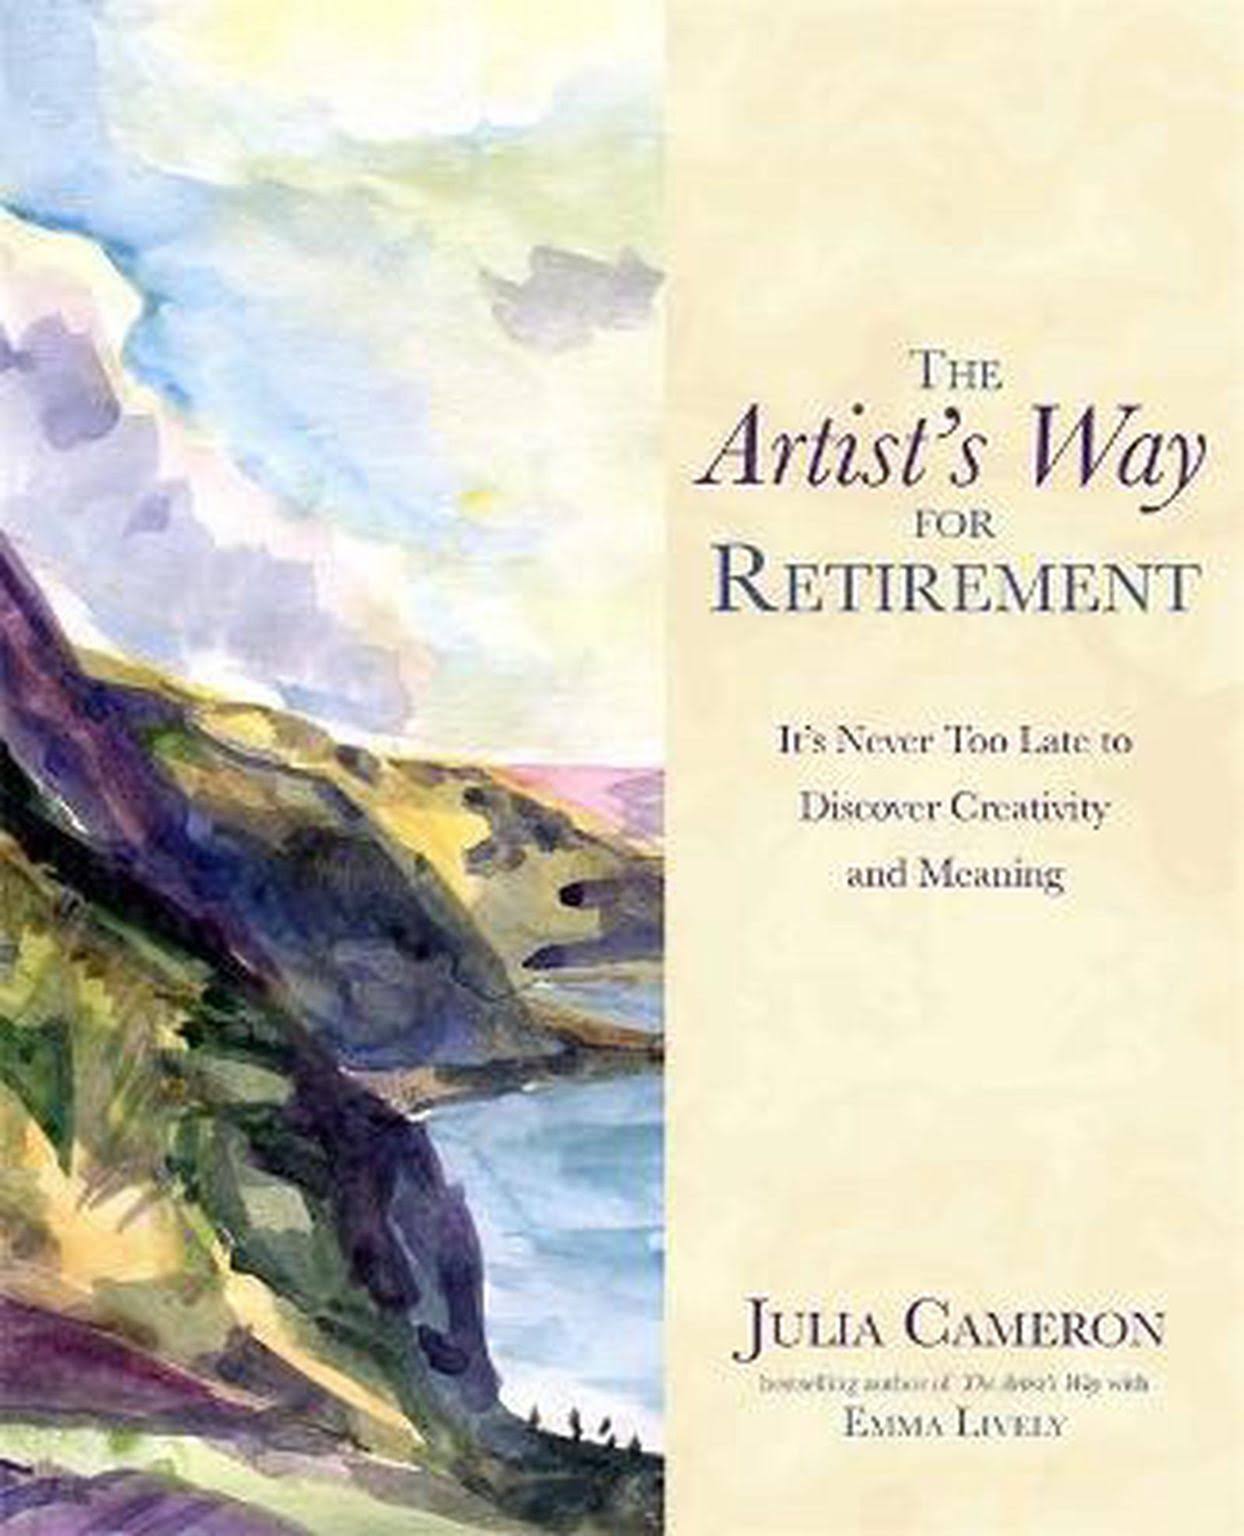 The Artist's Way for Retirement - Julia Cameron